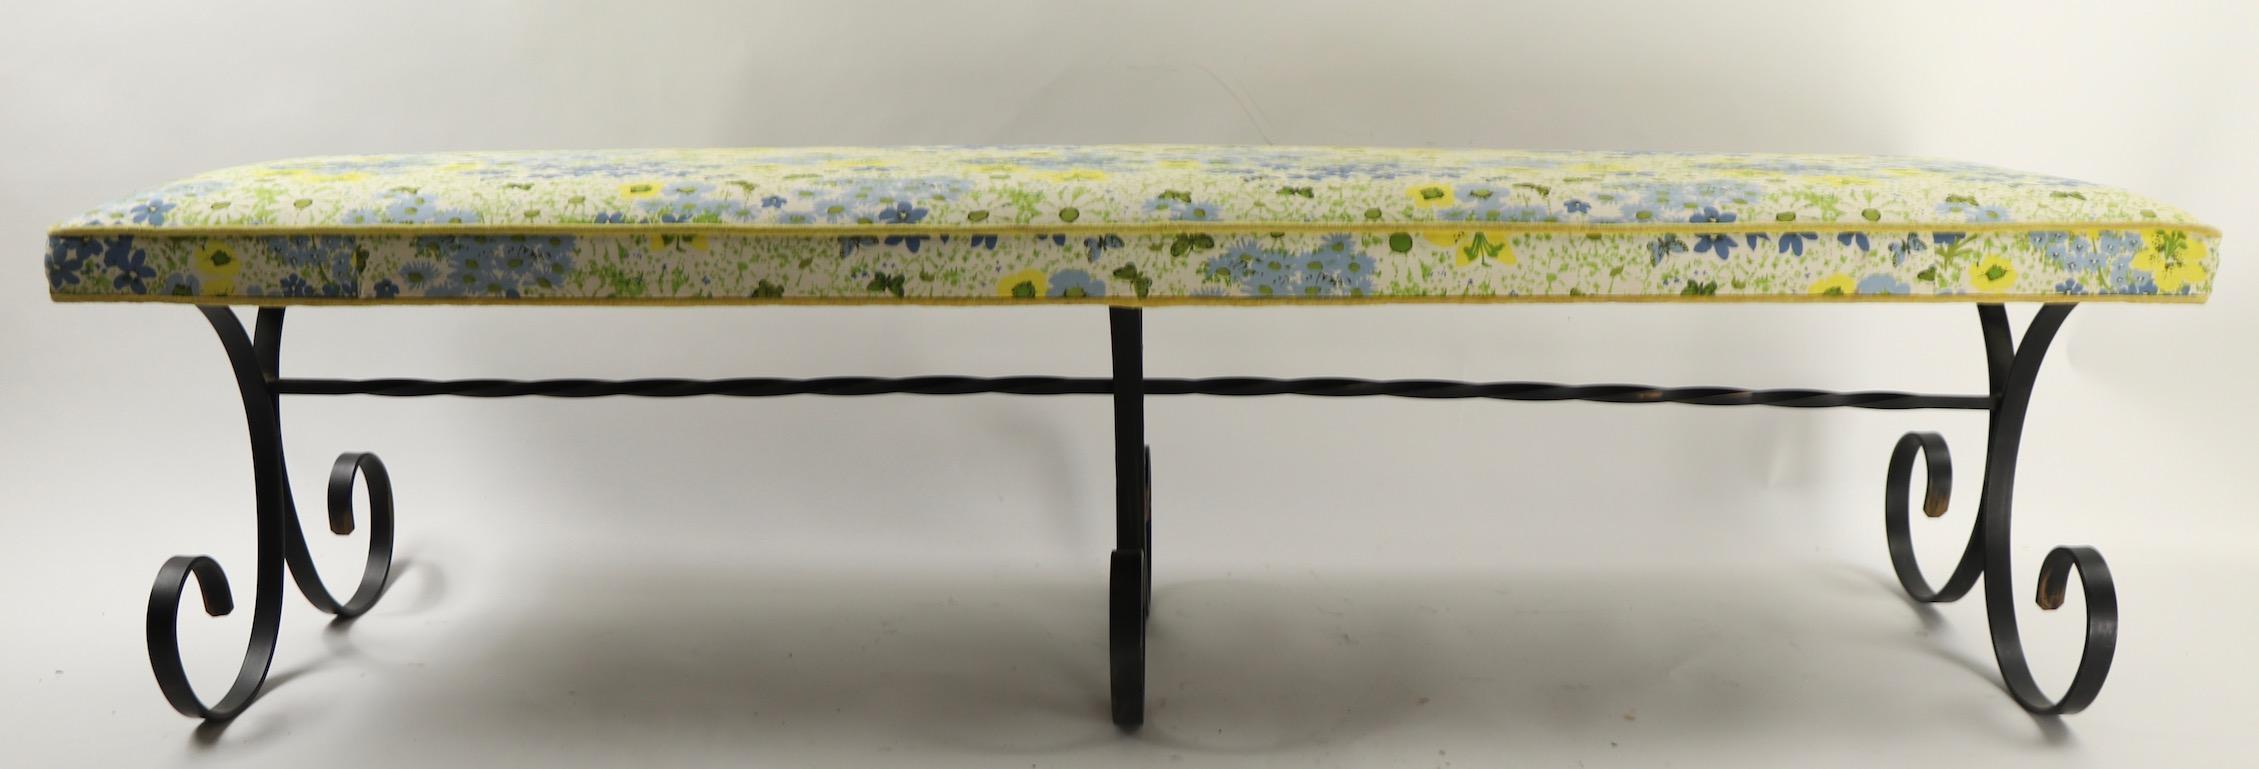 wrought iron upholstered bench